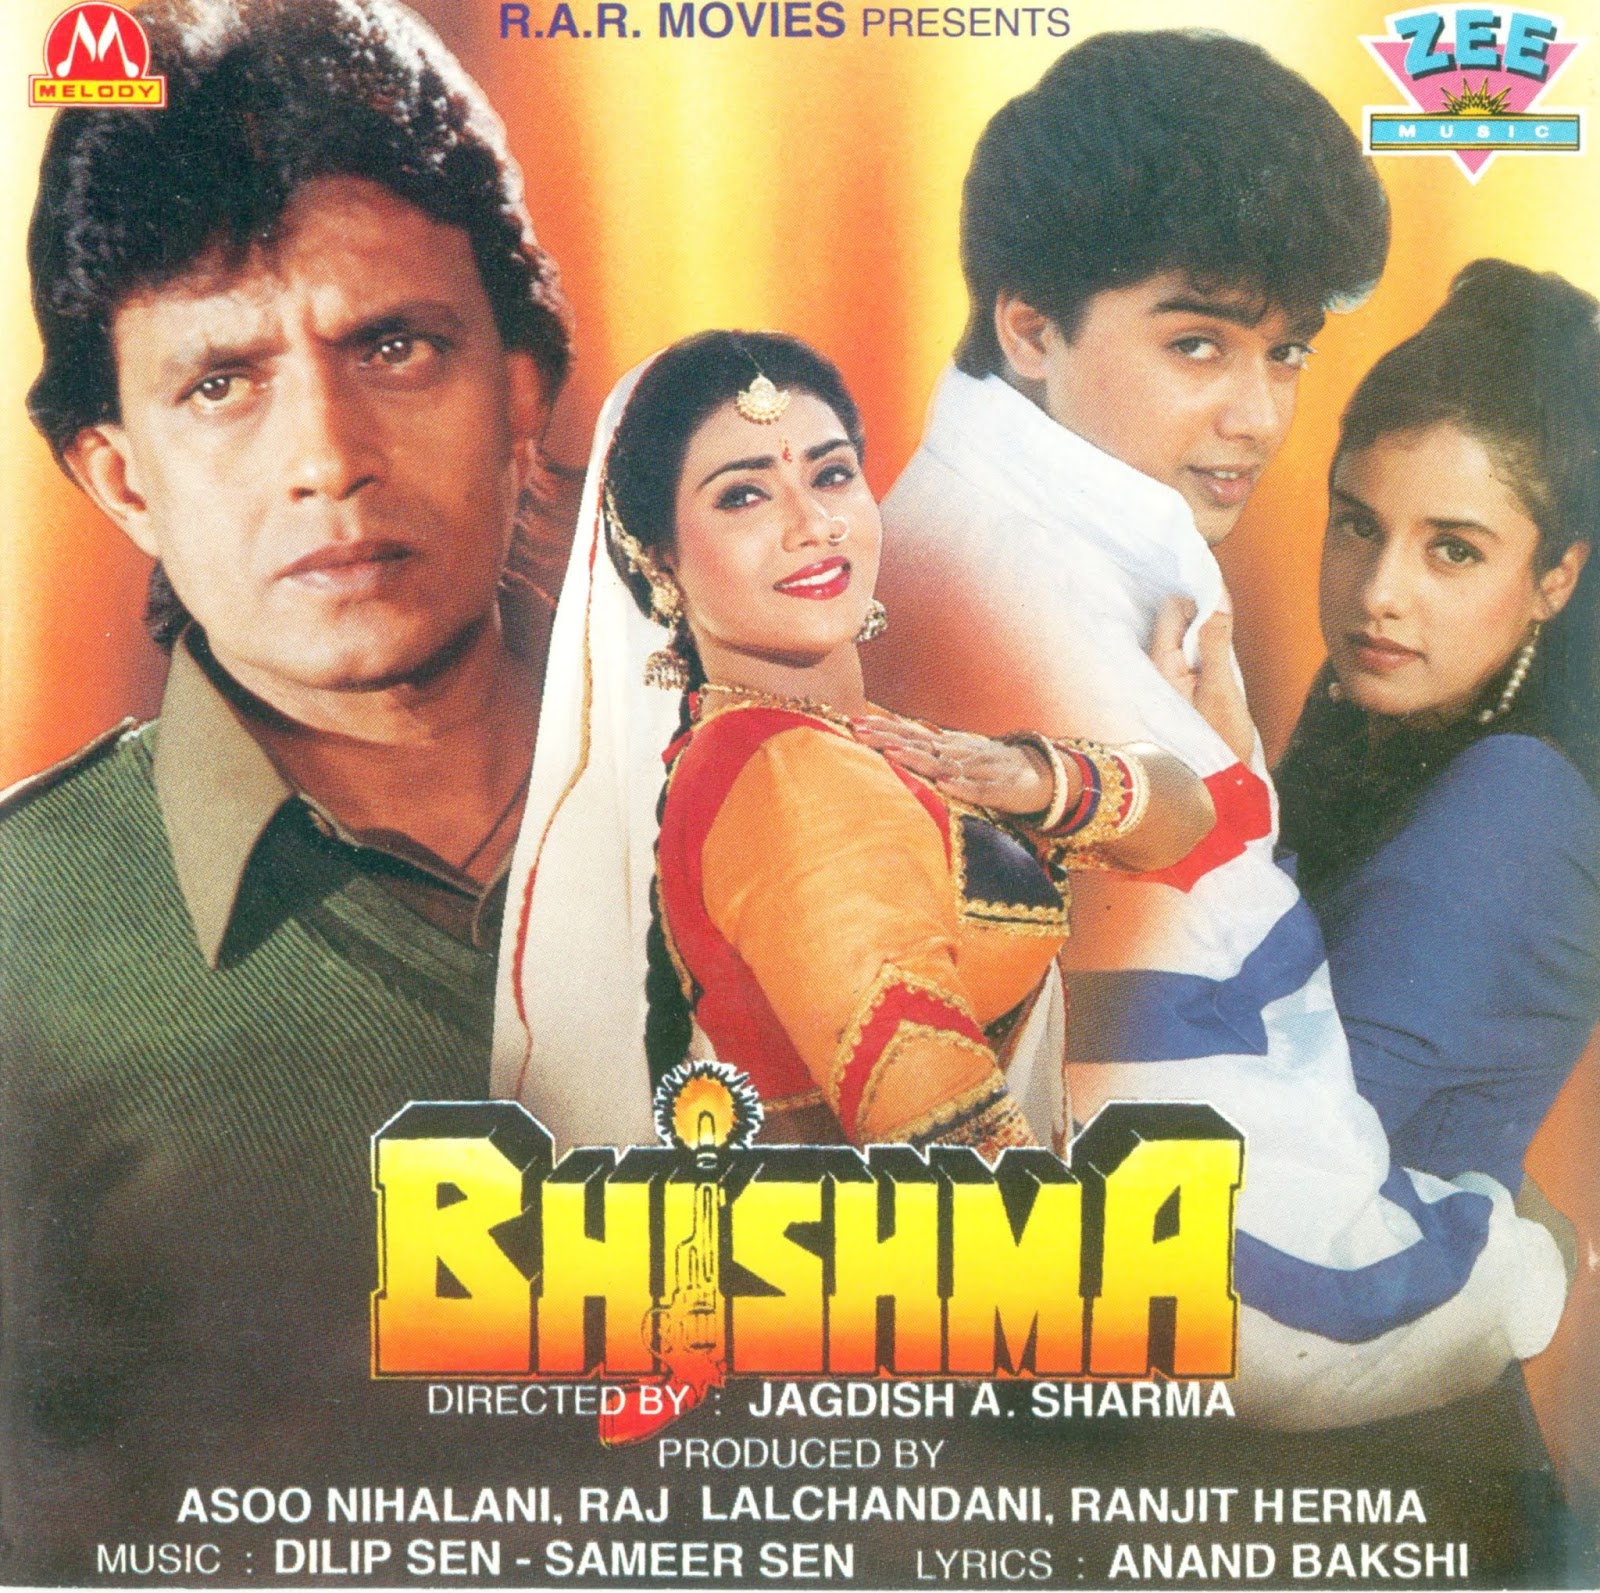 Bollywood Movies Flac Mp3 Songs Downloaded Here Movie Bhishma 1996 Flac